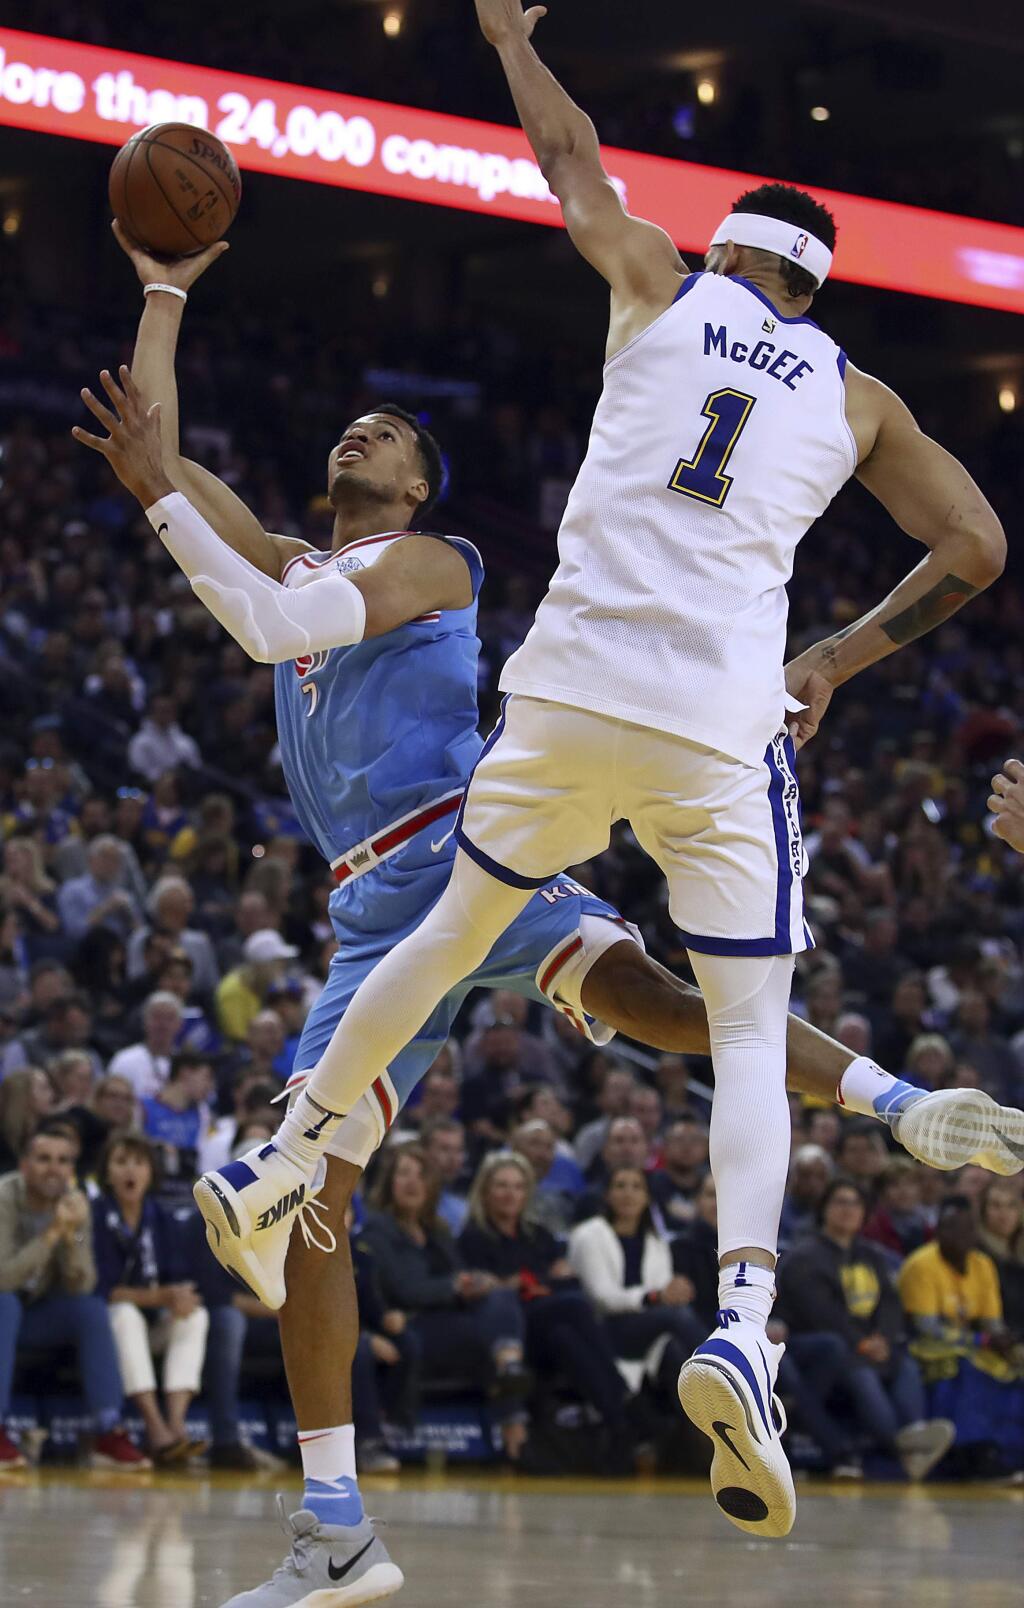 Sacramento Kings' Skal Labissiere, left, shoots against Golden State Warriors' JaVale McGee, right, during the first half of an NBA basketball game on Friday, March 16, 2018, in Oakland, Calif. (AP Photo/Ben Margot)